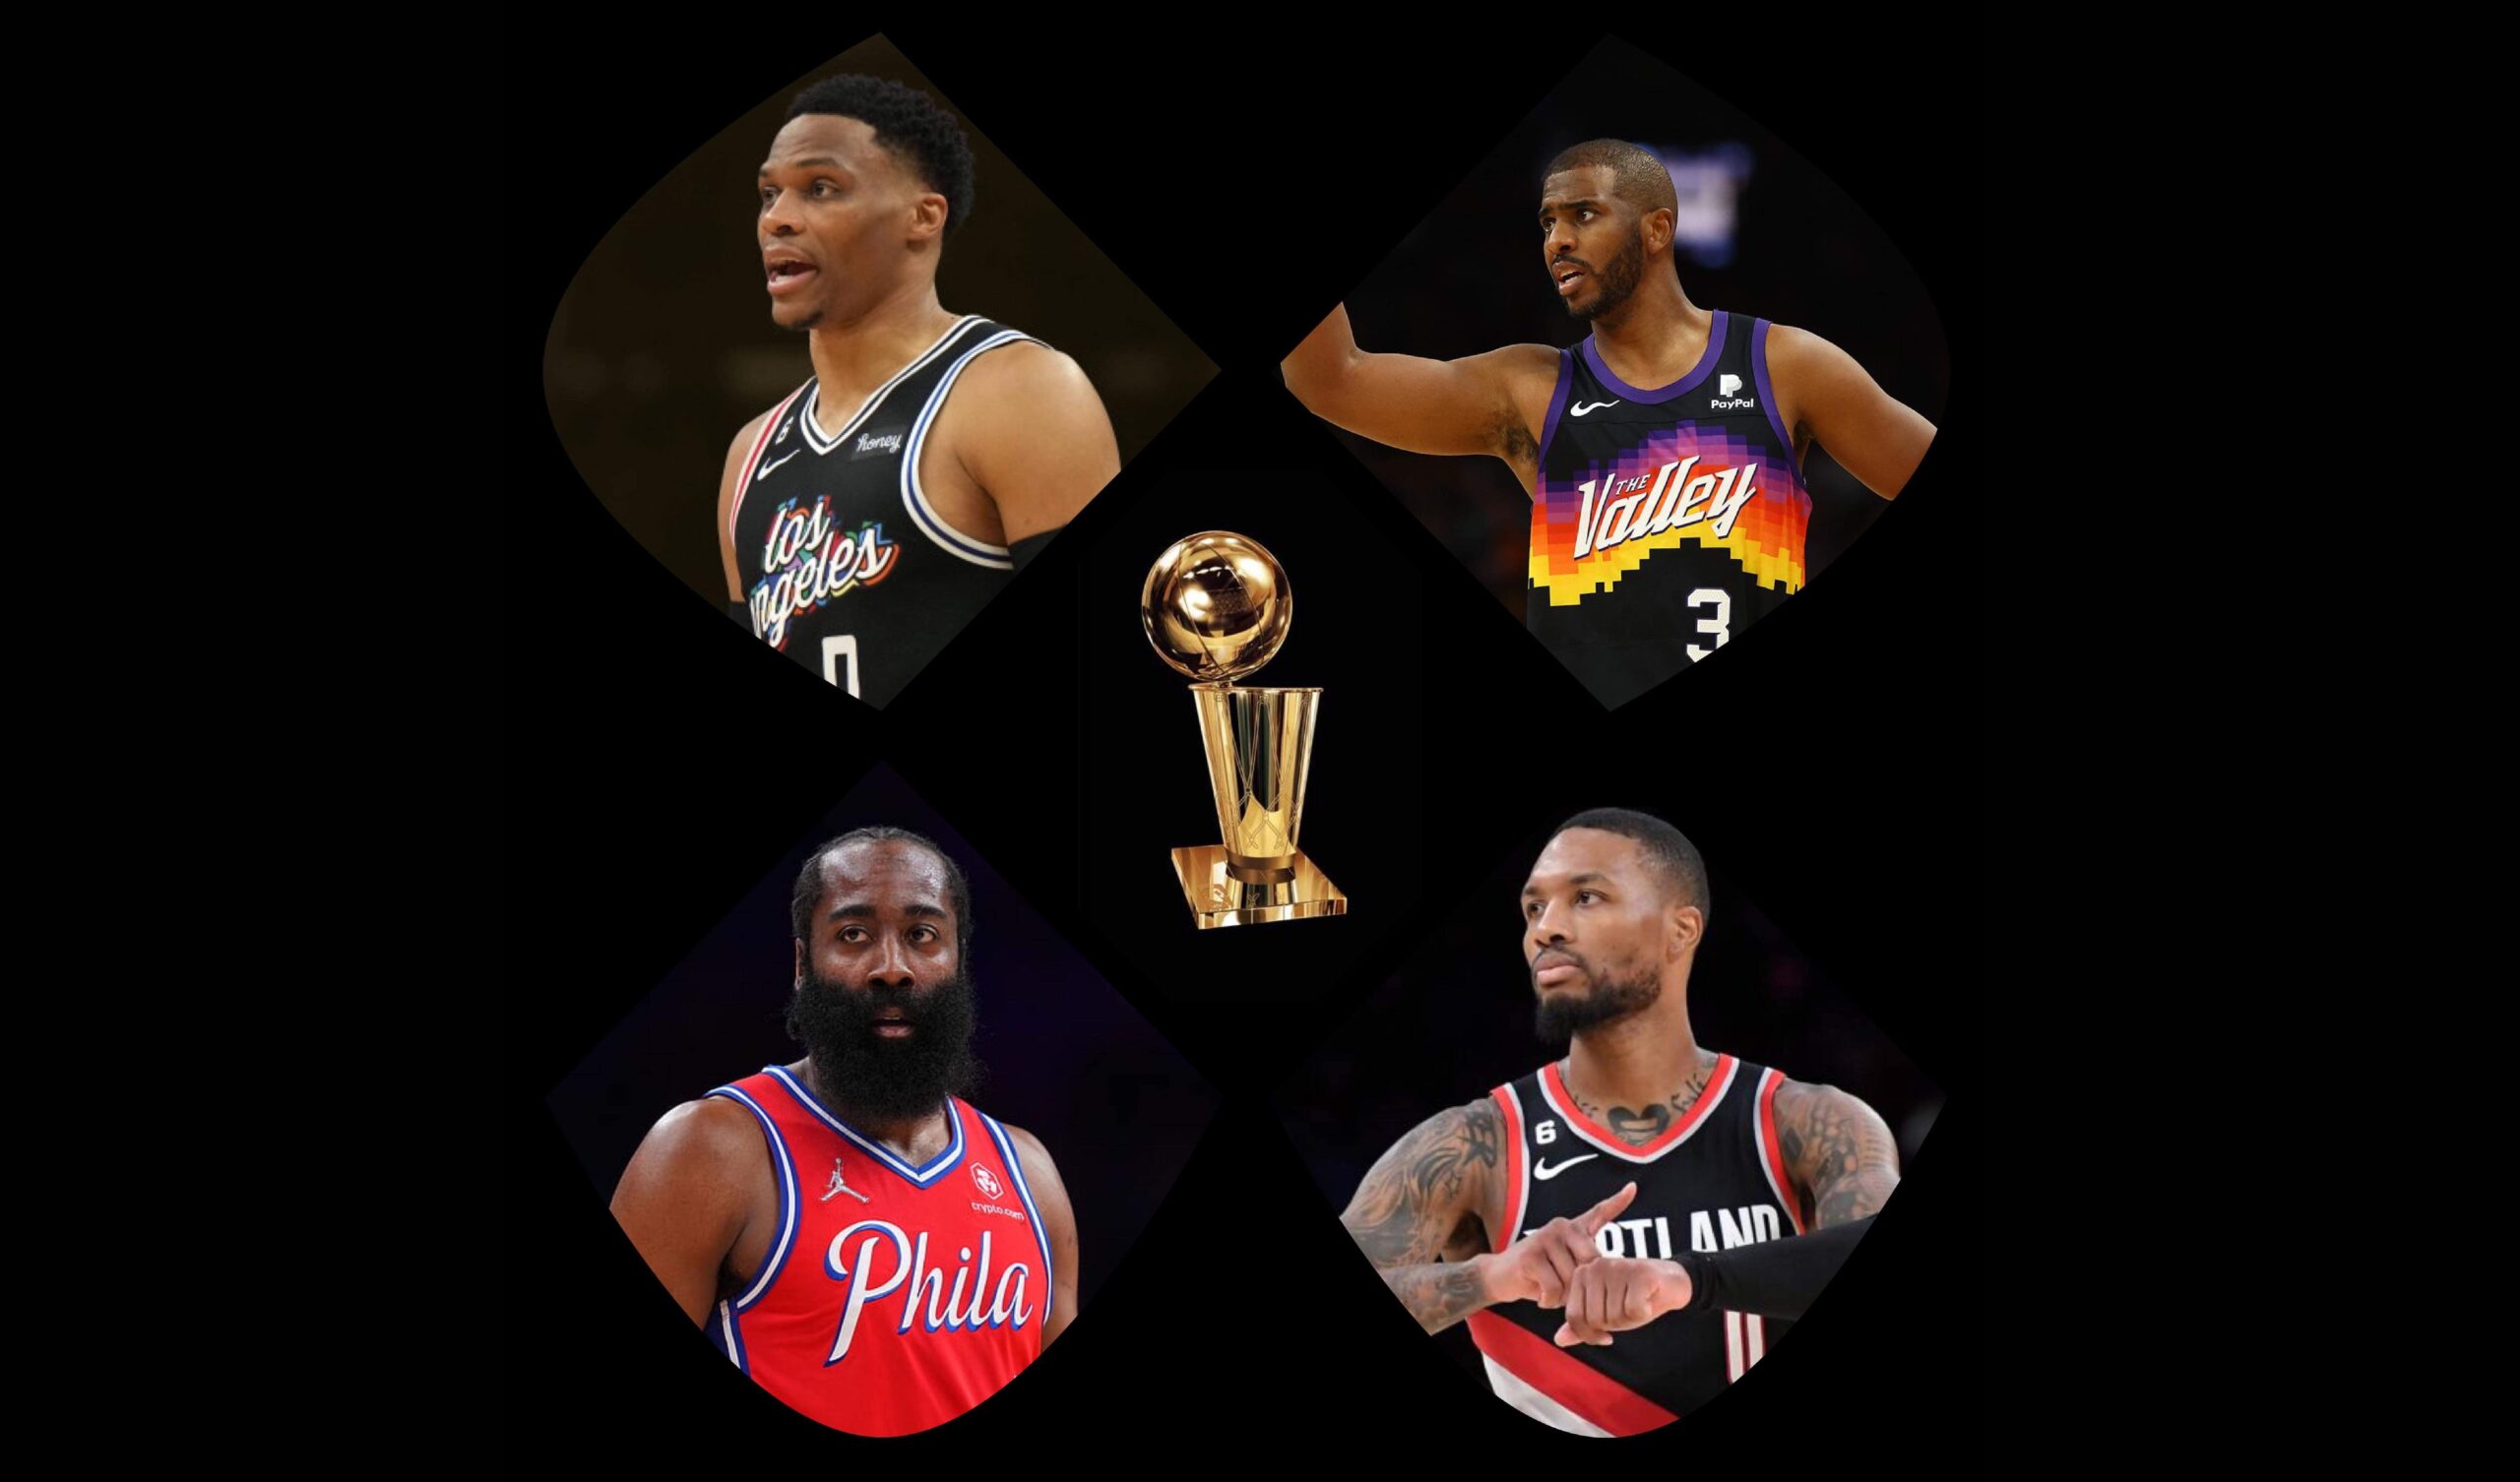 Who Deserves A Ring/NBA Championship The Most? (4-21-23)